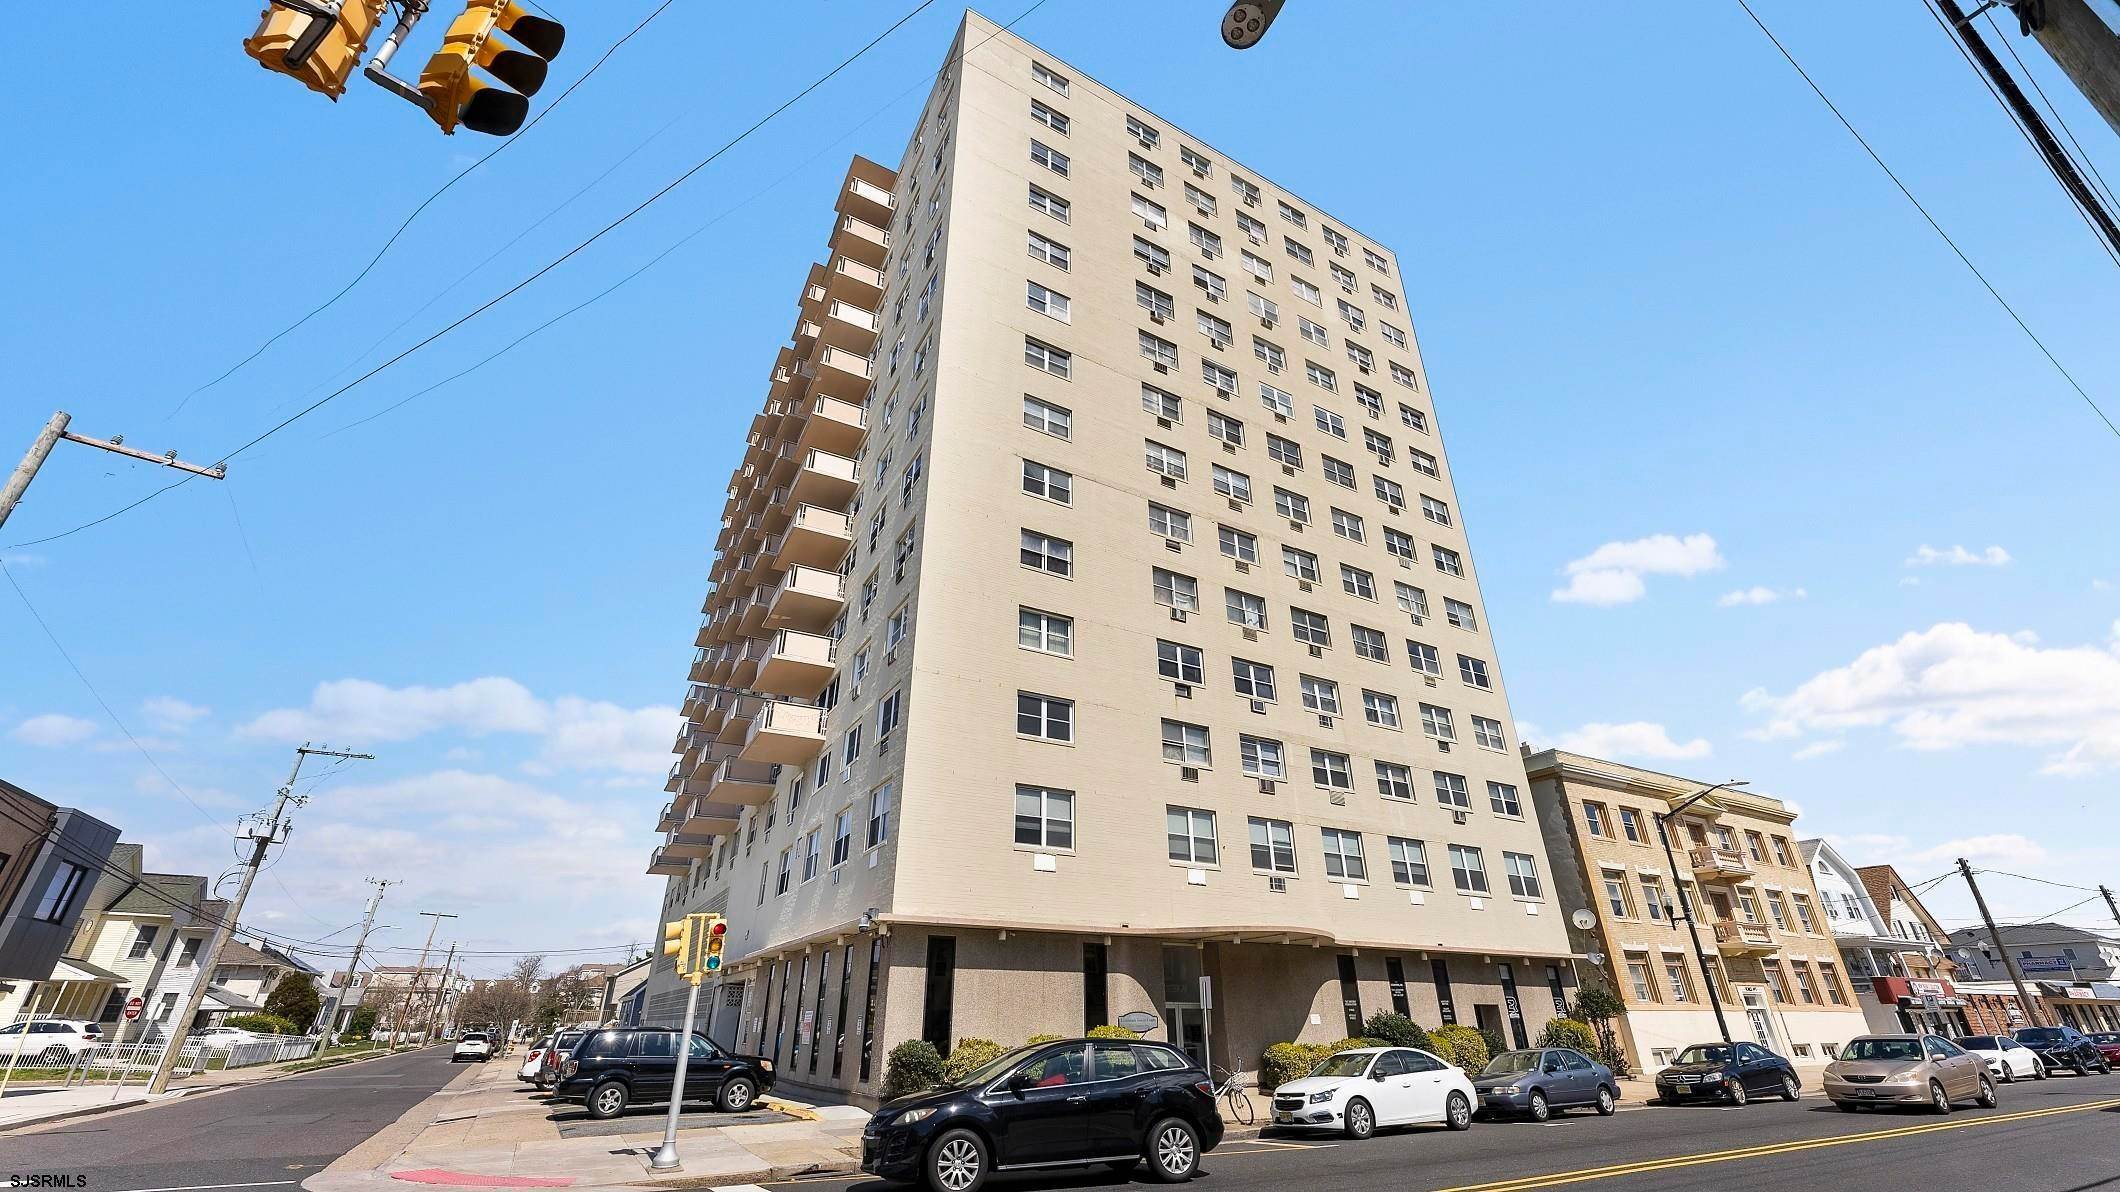 17. Condominiums for Sale at 3817 Ventnor Ave Apt 710 Atlantic City, New Jersey 08401 United States